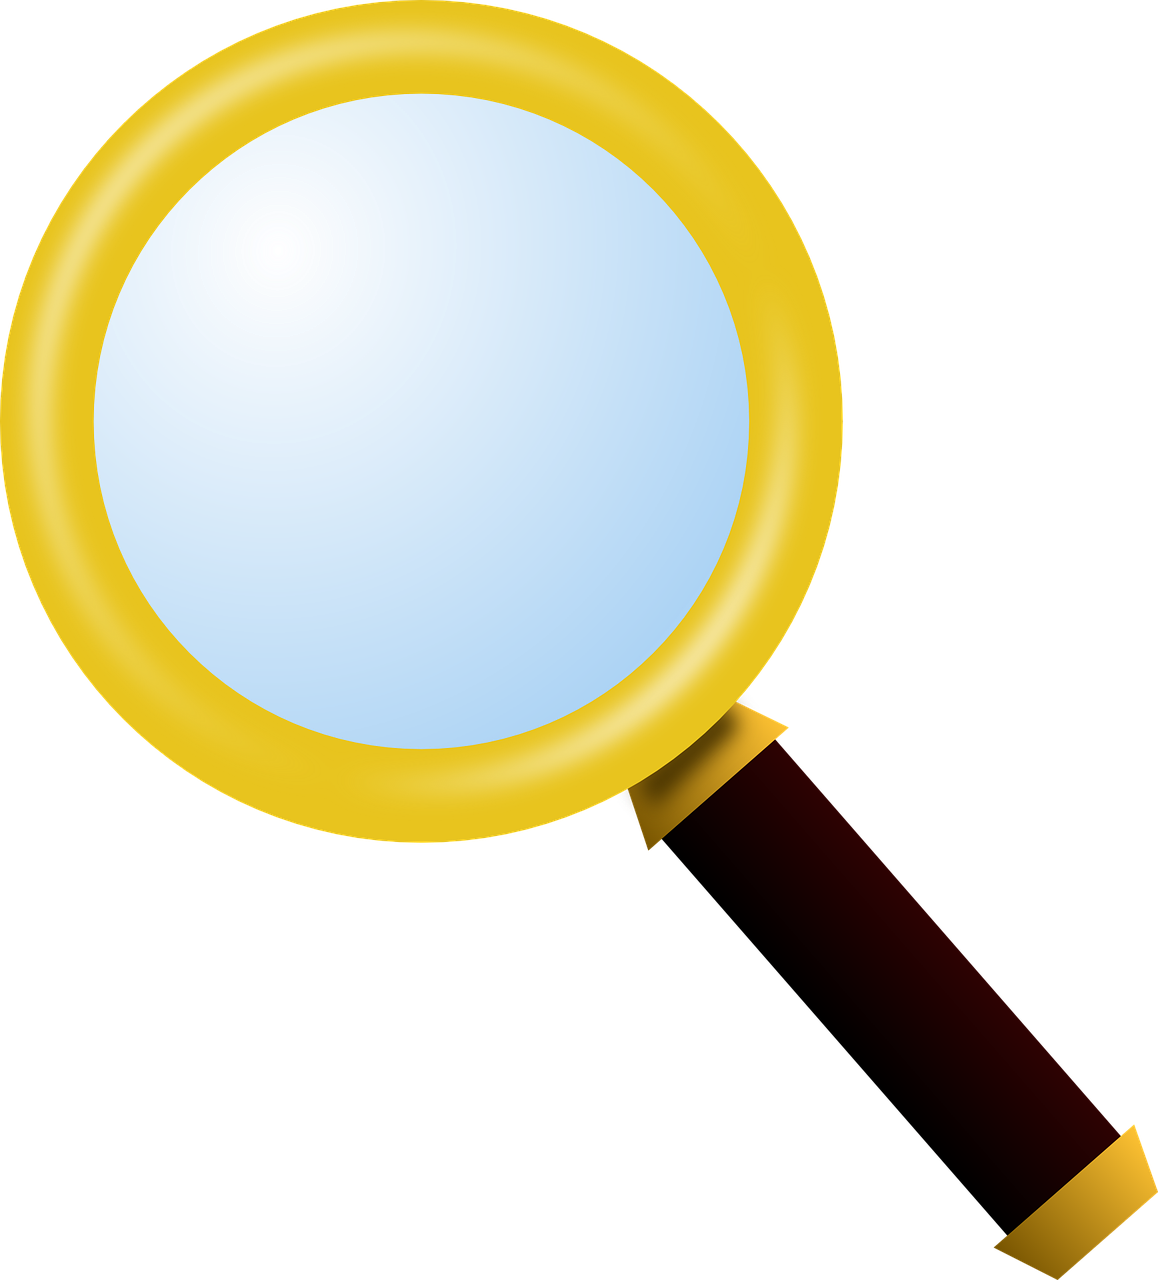 magnifying glass icon vector image free photo